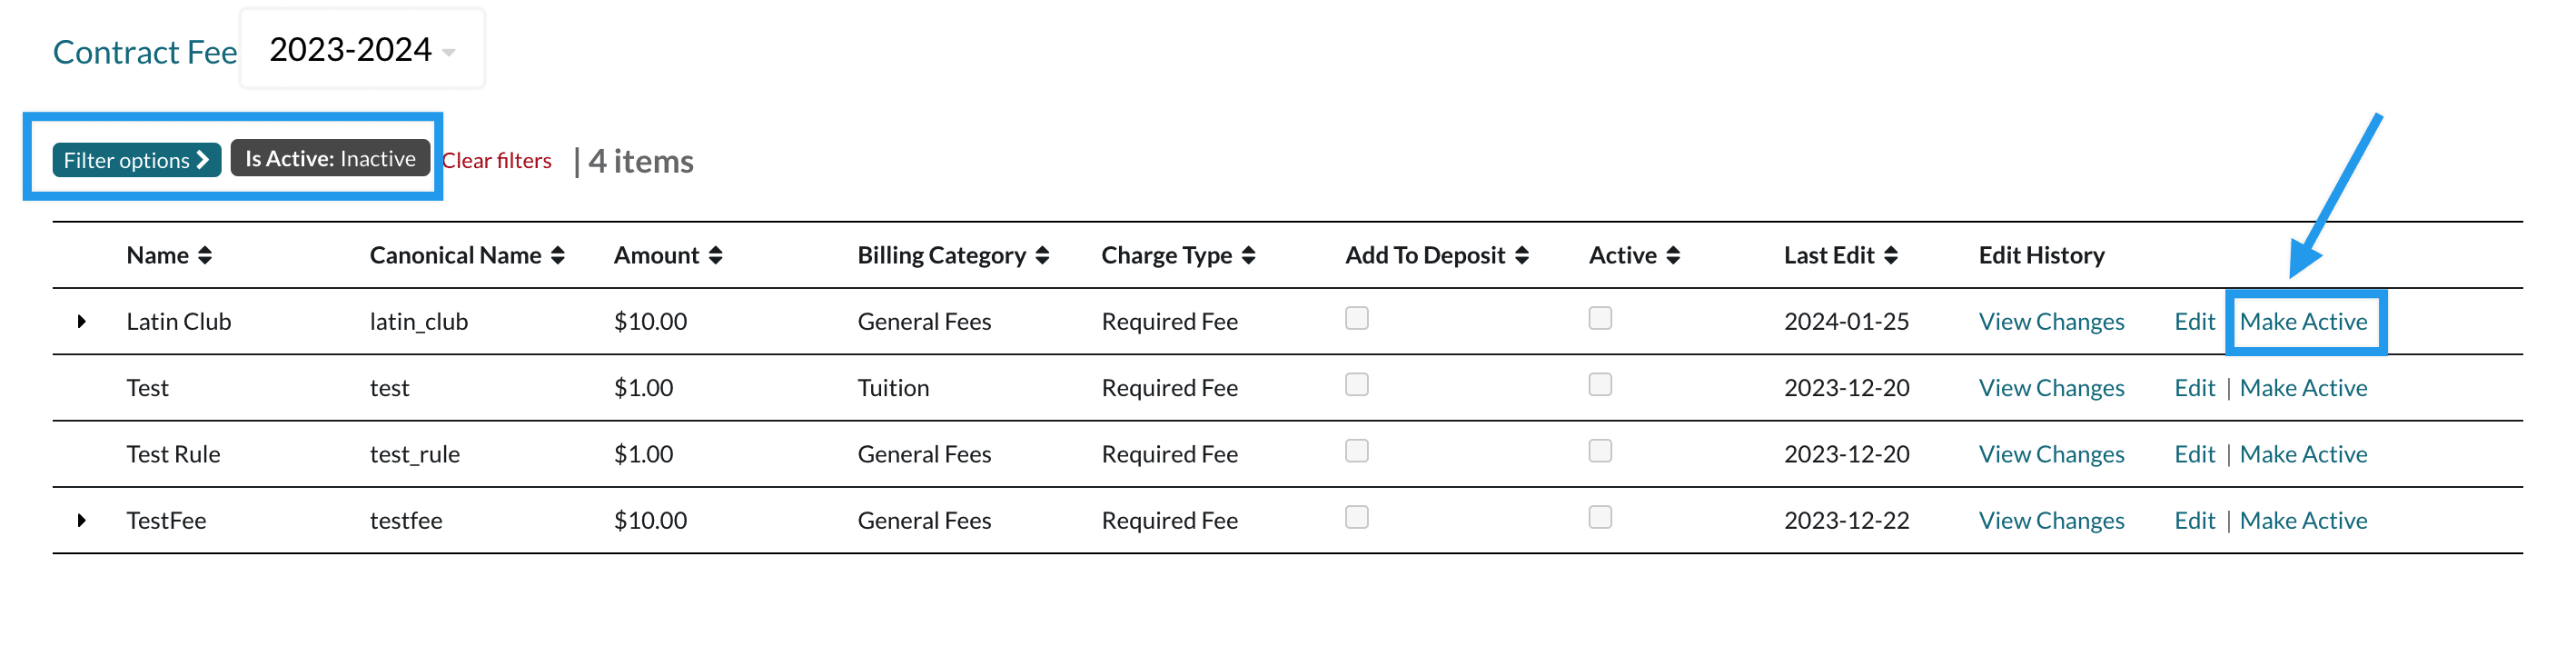 Contract Fees filtered to show inactive fees